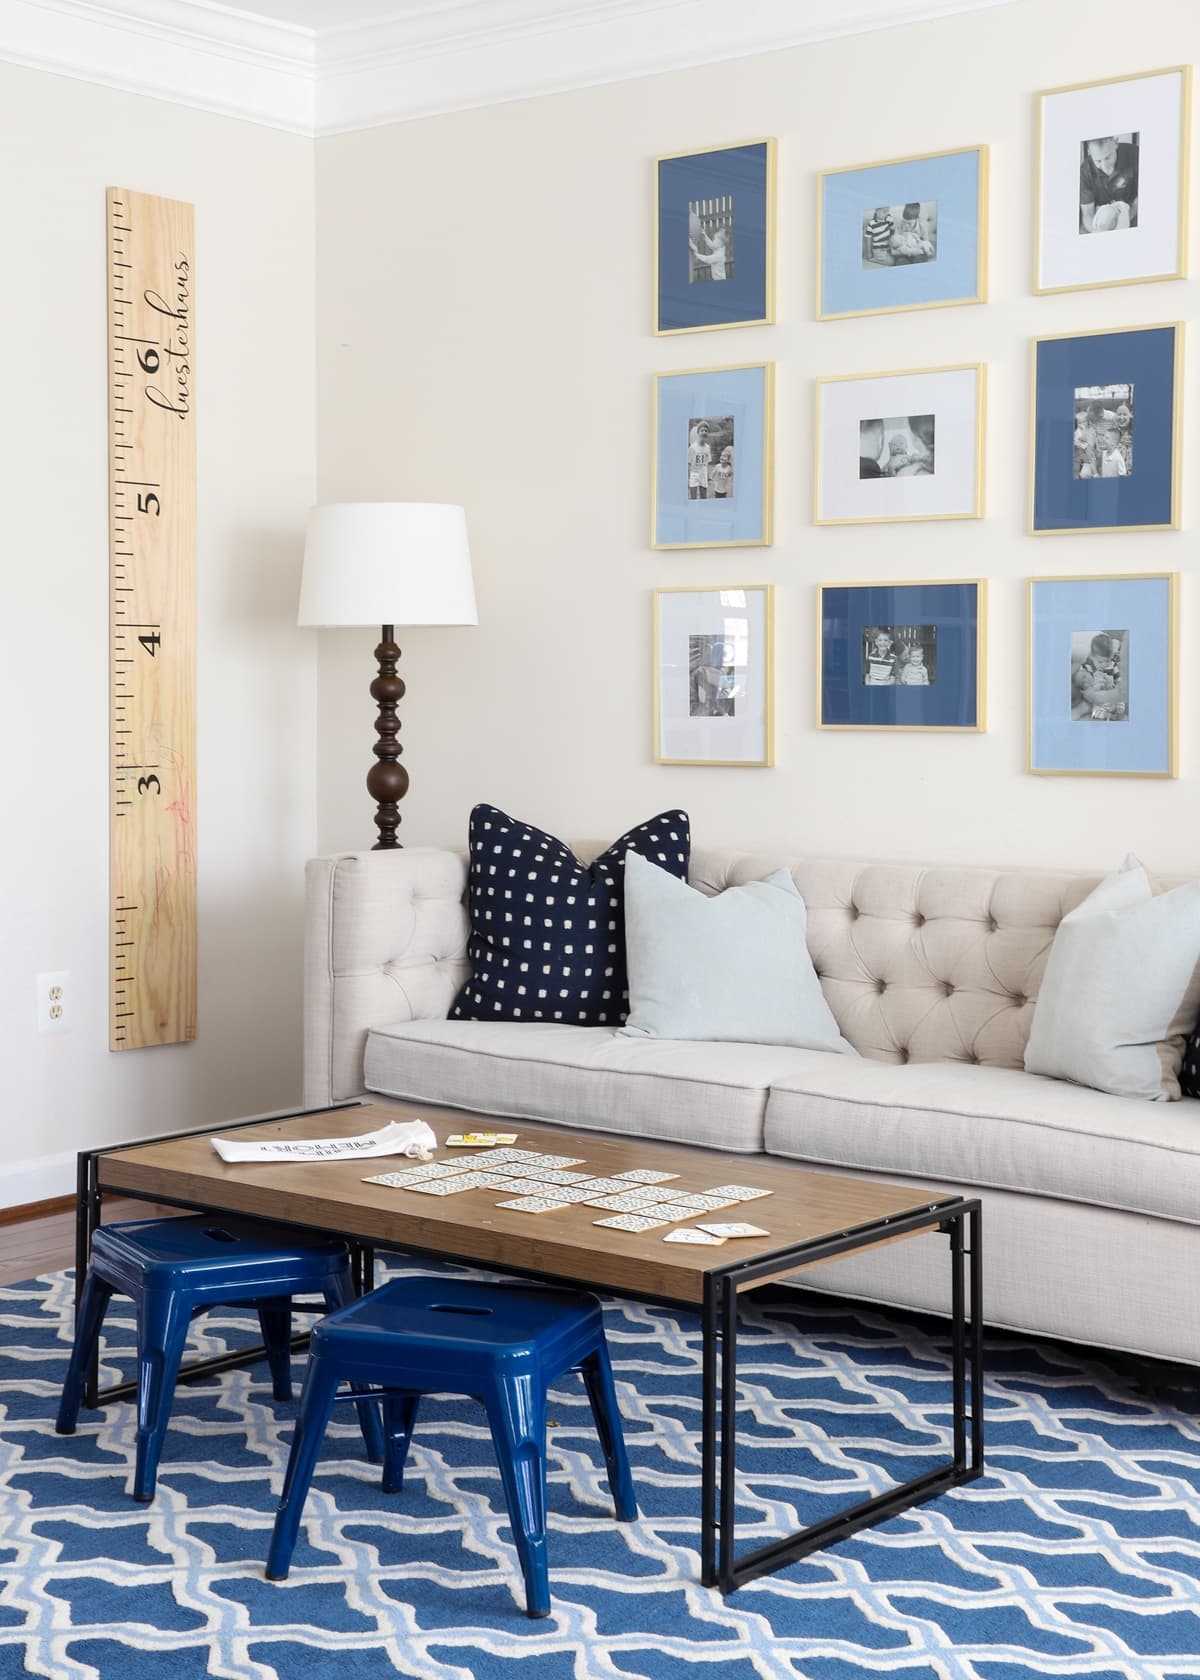 Brown coffee table in a playroom on a blue rug with wall ruler and couch